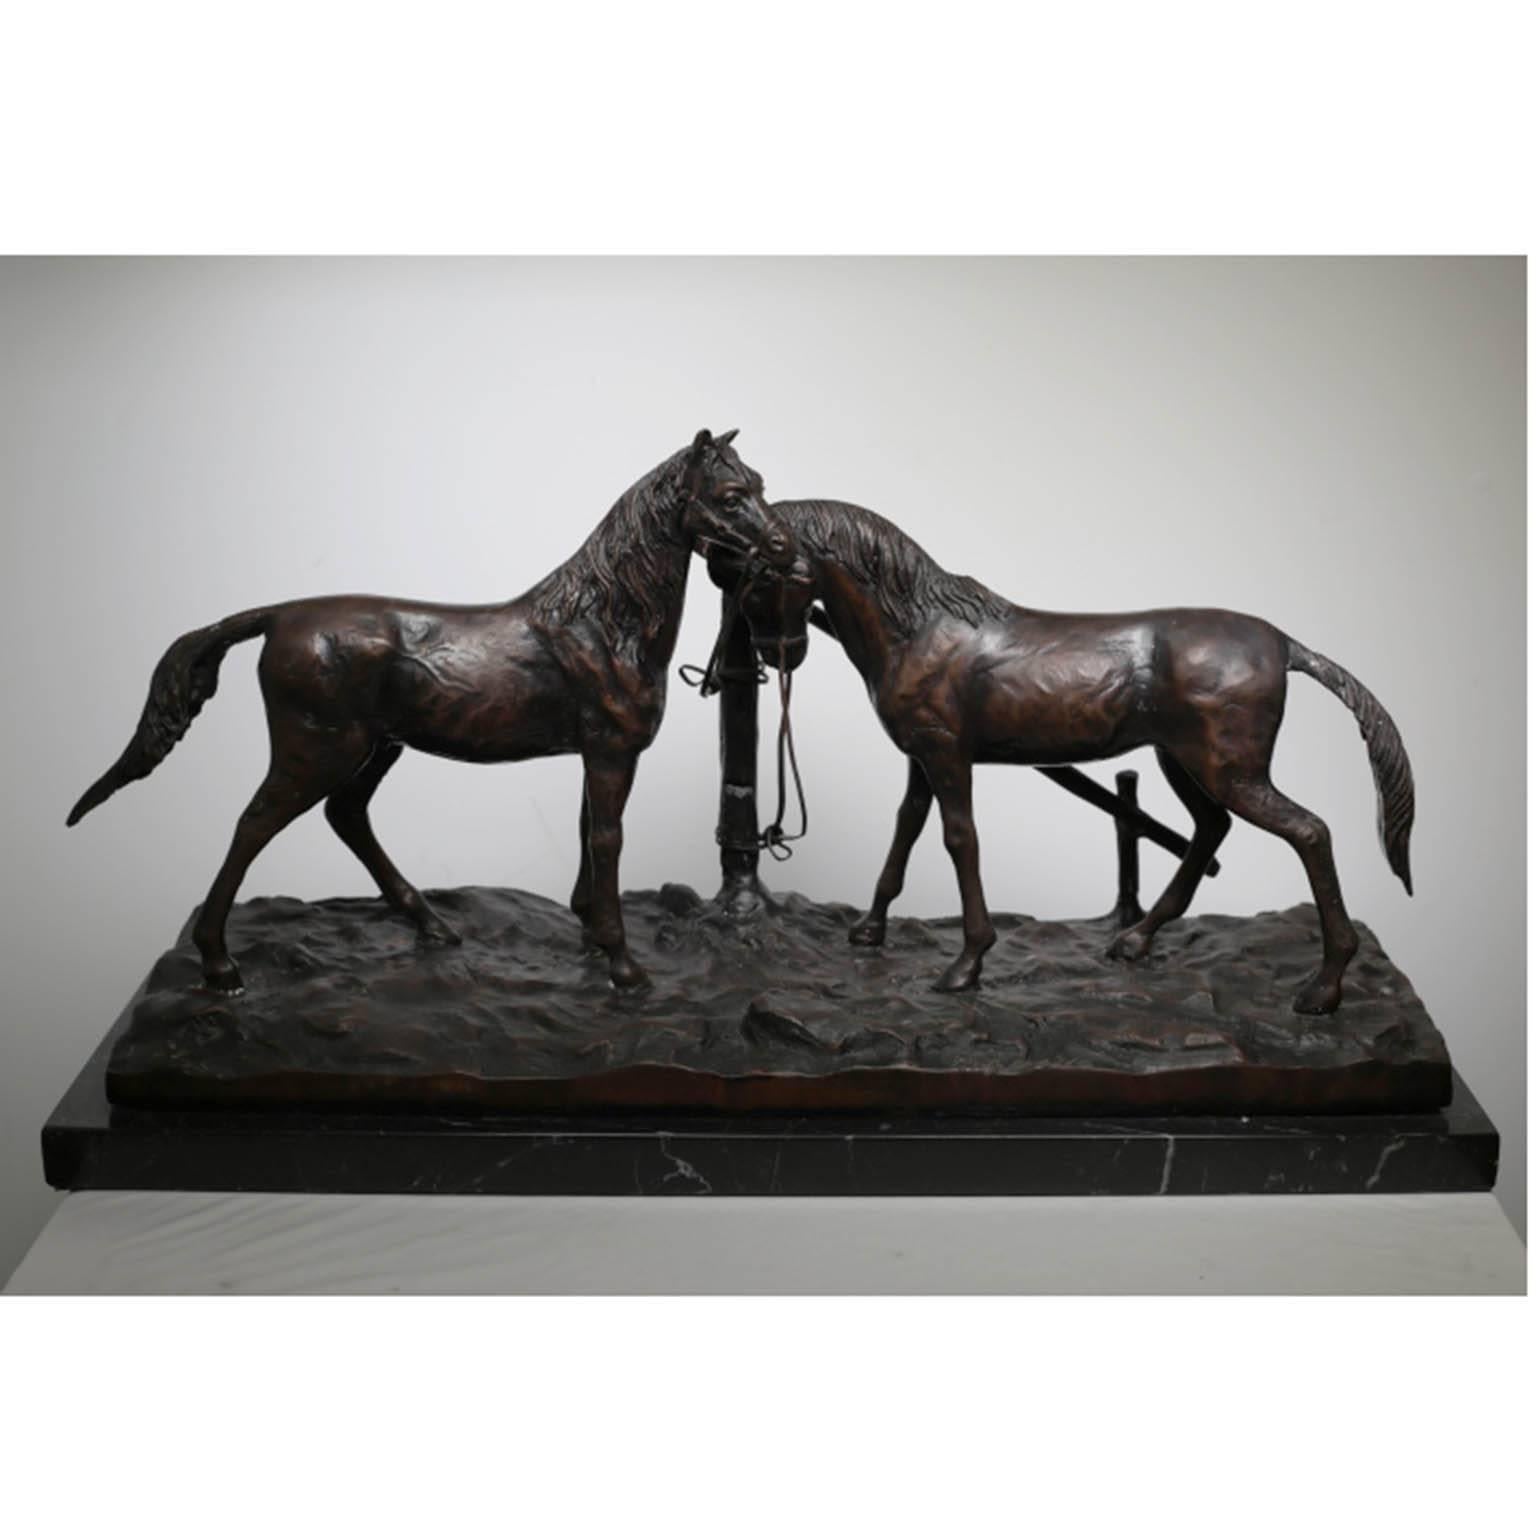 Bronze horse sculpture in the style of Pierre Jules Mene, who was a French sculptor and animalière. He is considered one of the pioneers of animal sculpture in the 19th century. Although this piece is signed, it was determined that it not Mene but